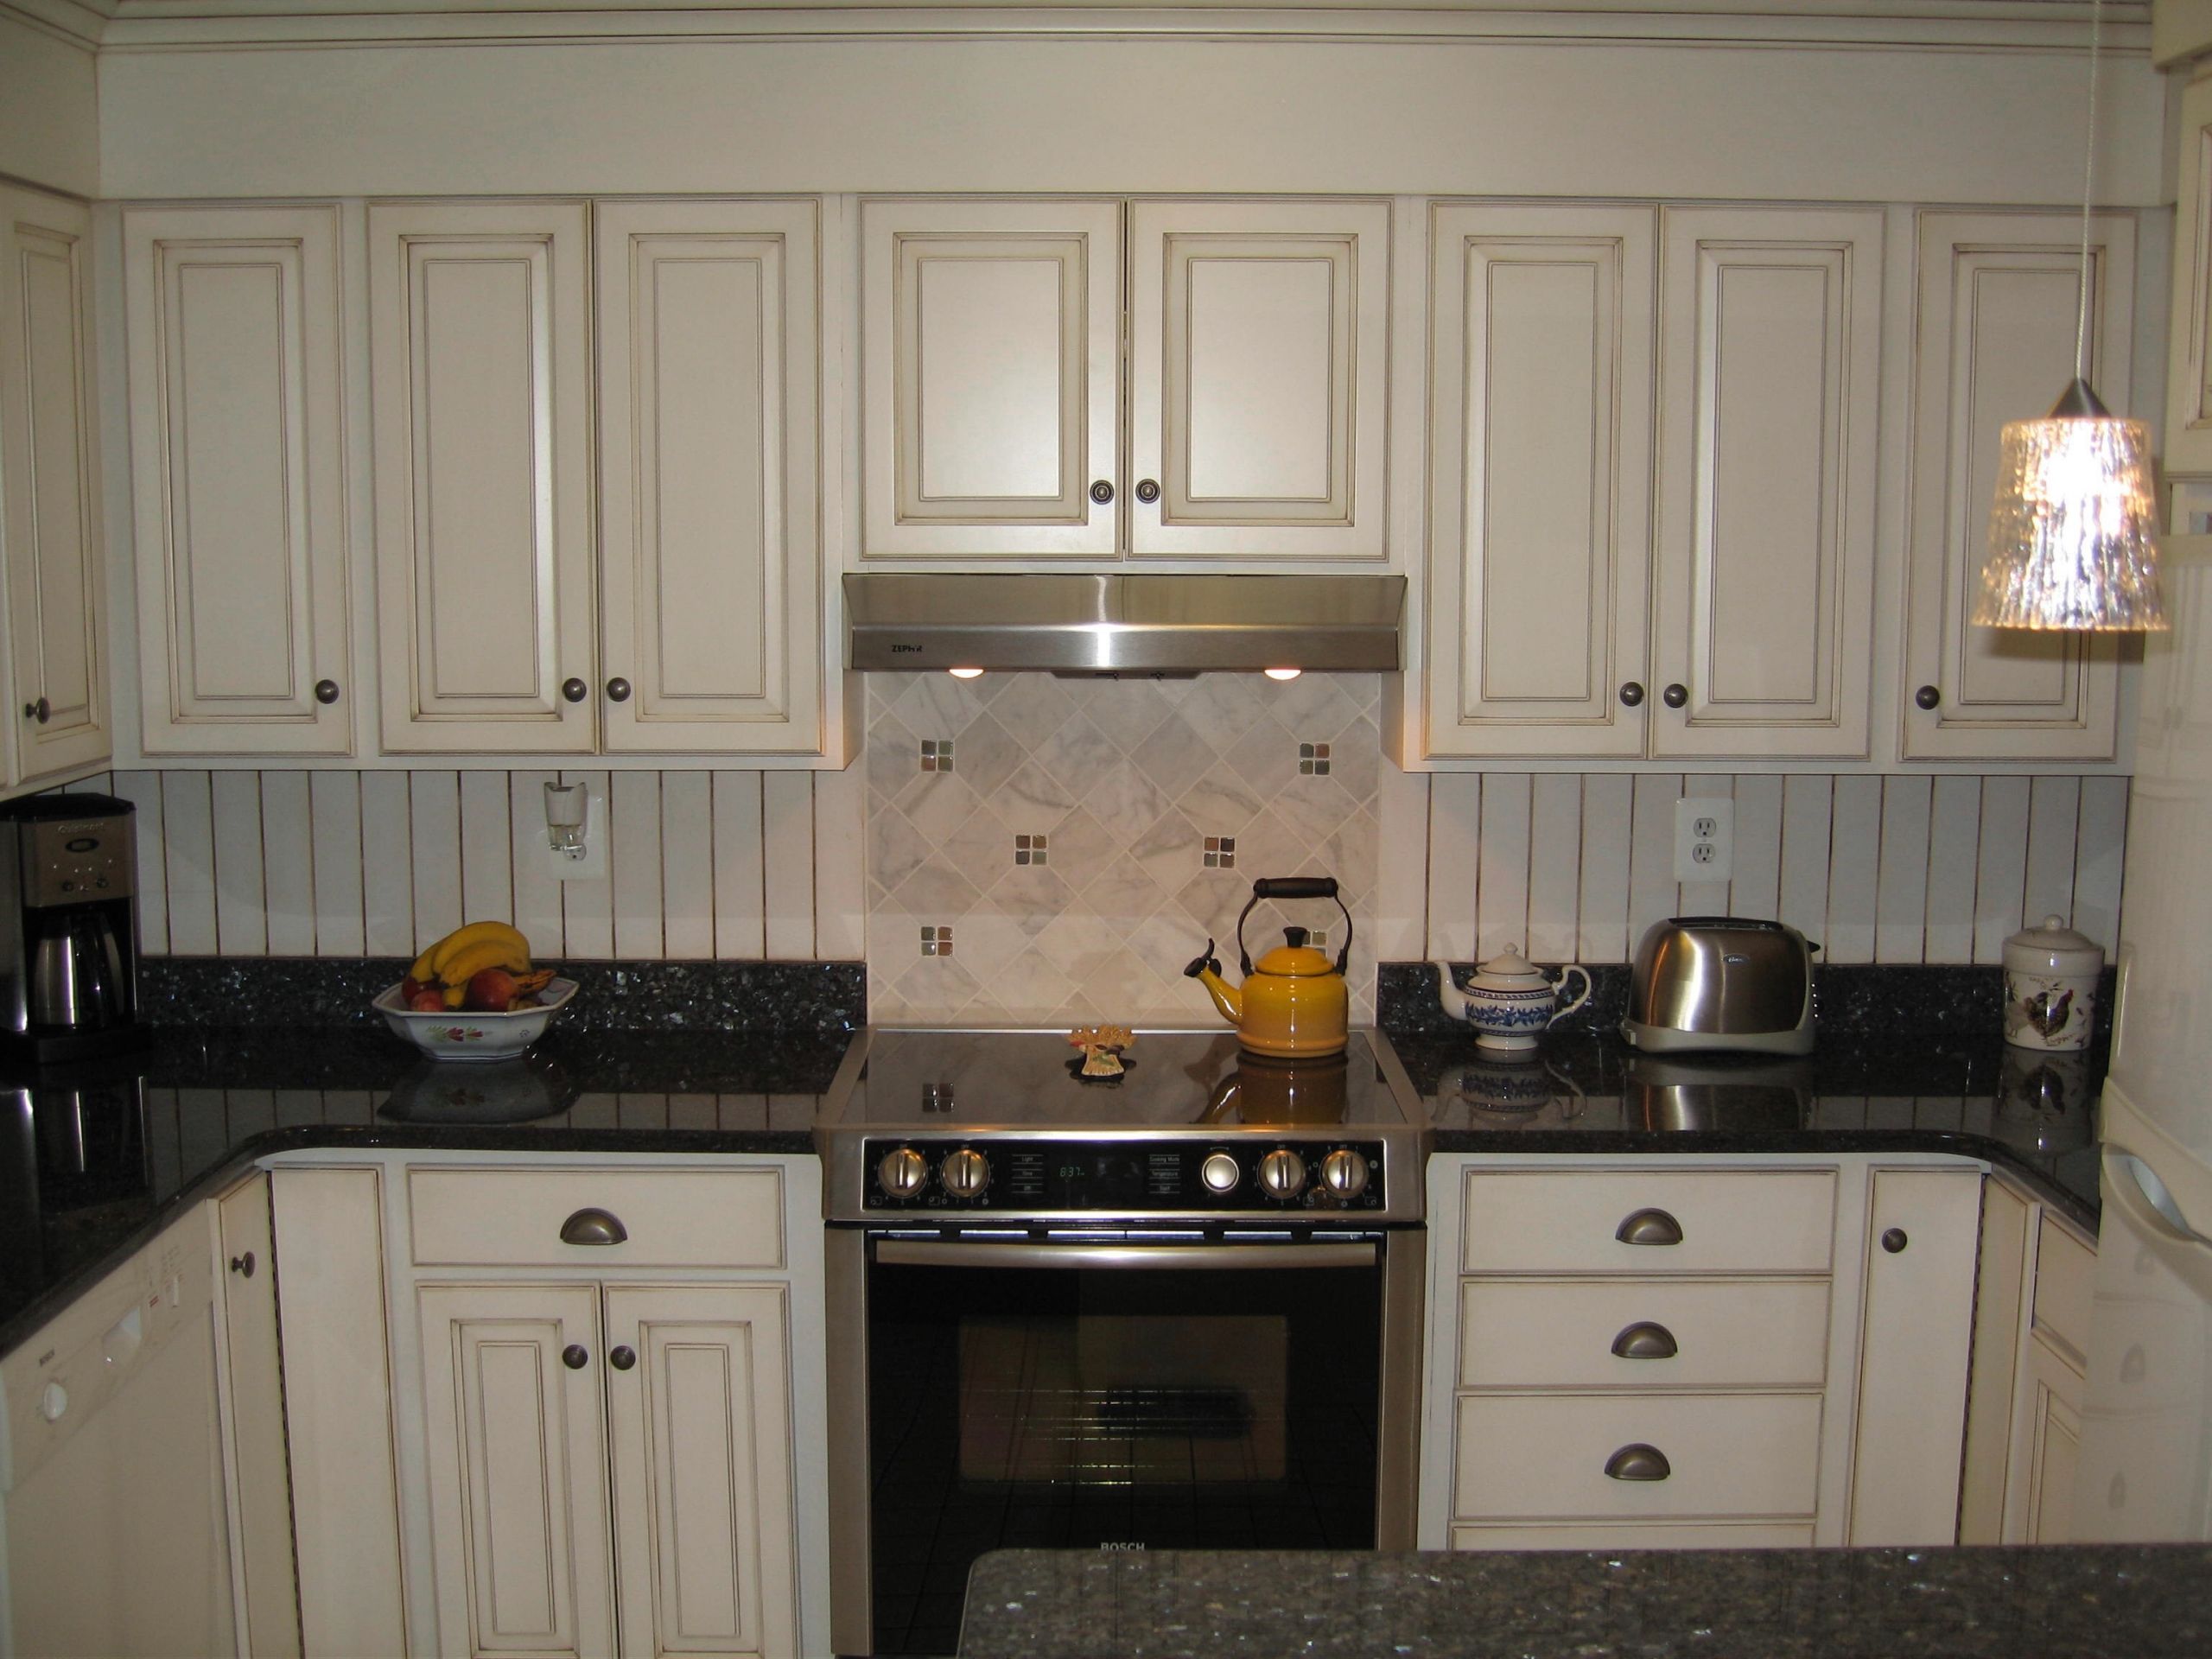 Kitchen Cabinet Replacement Doors
 Replacement Kitchen Cabinet Doors Buying Guide for You